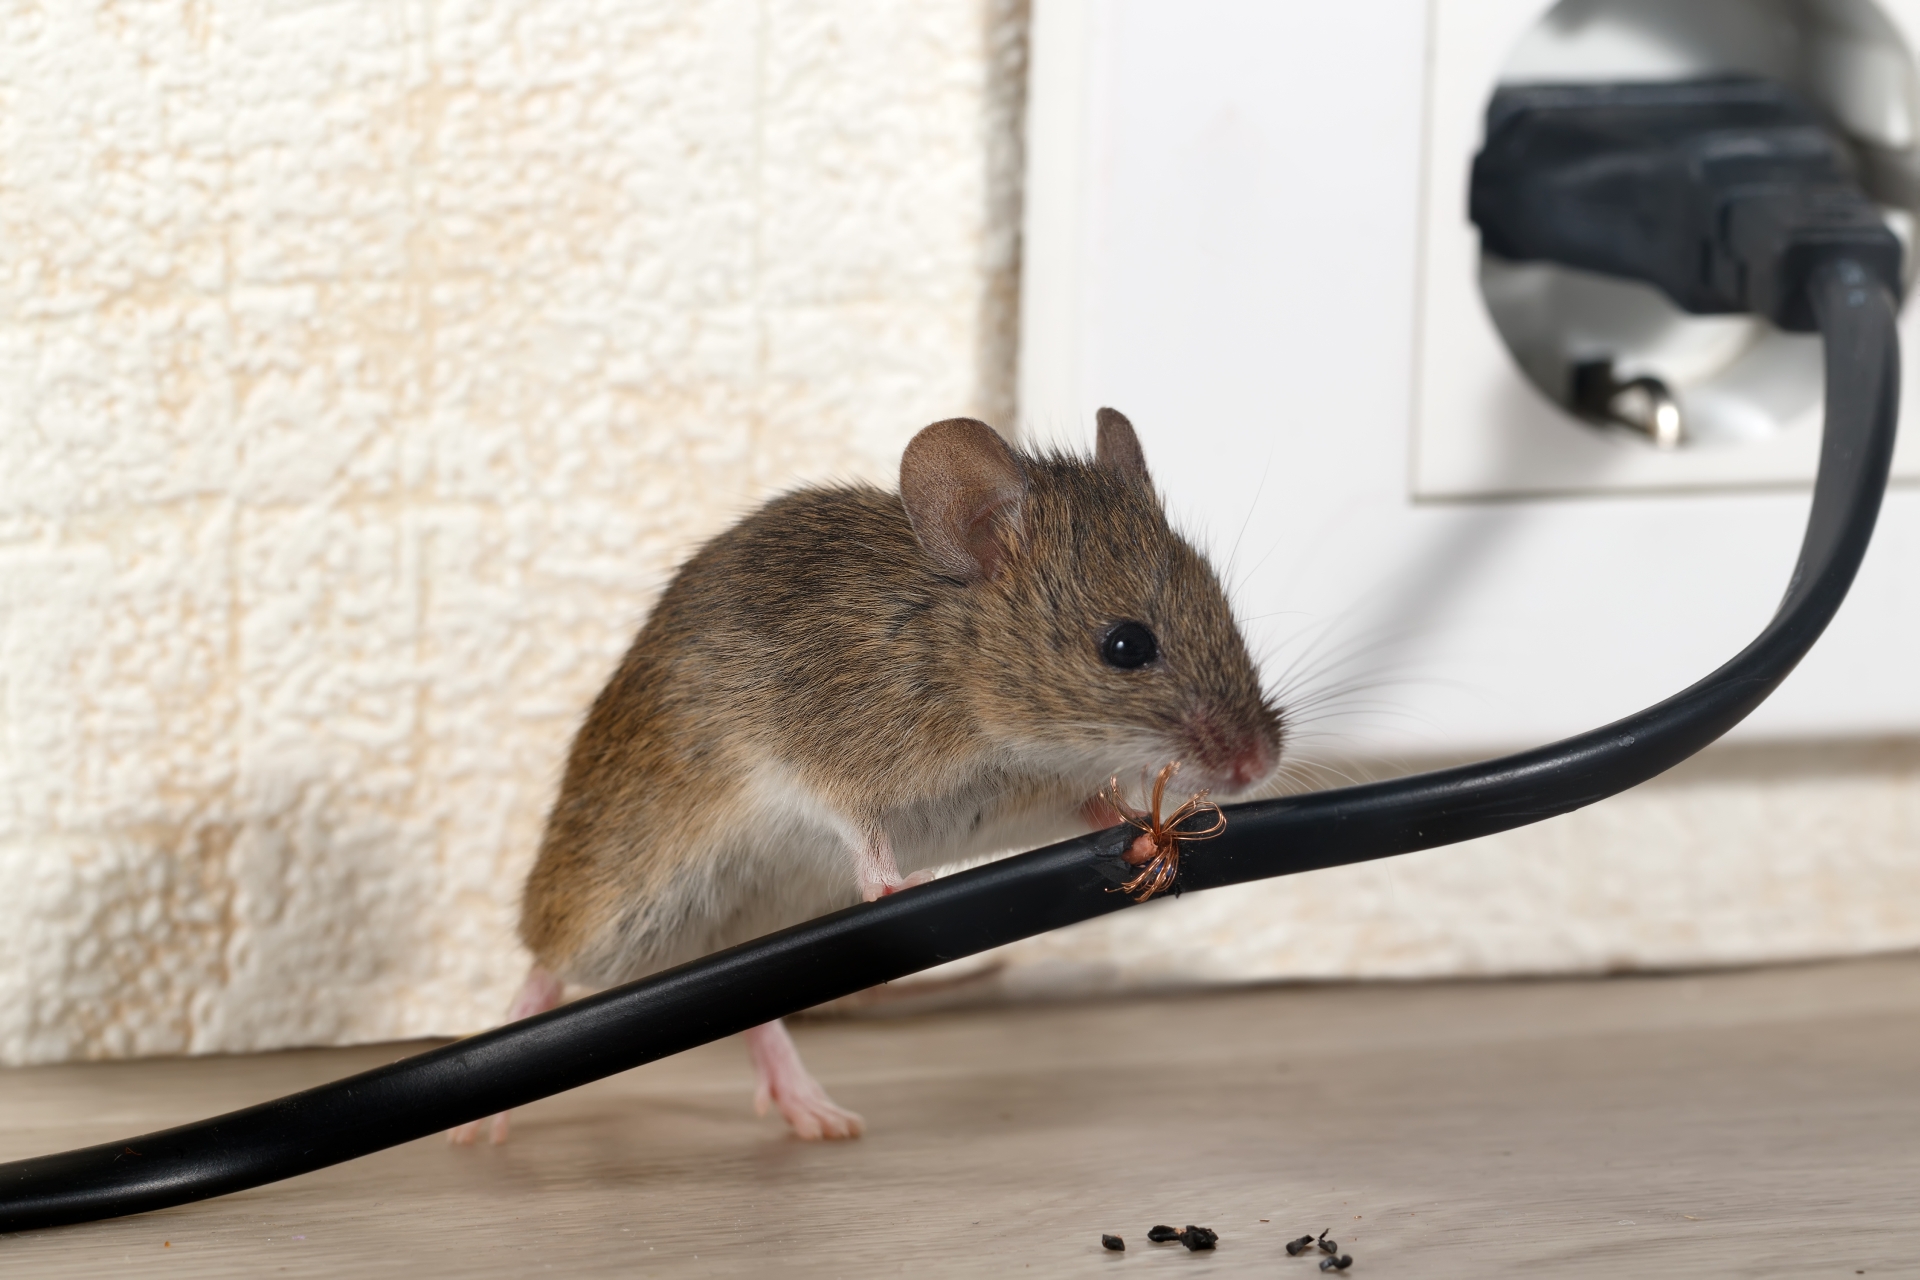 Mice Infestation, Pest Control in Petts Wood, St Mary Cray, BR5. Call Now 020 8166 9746